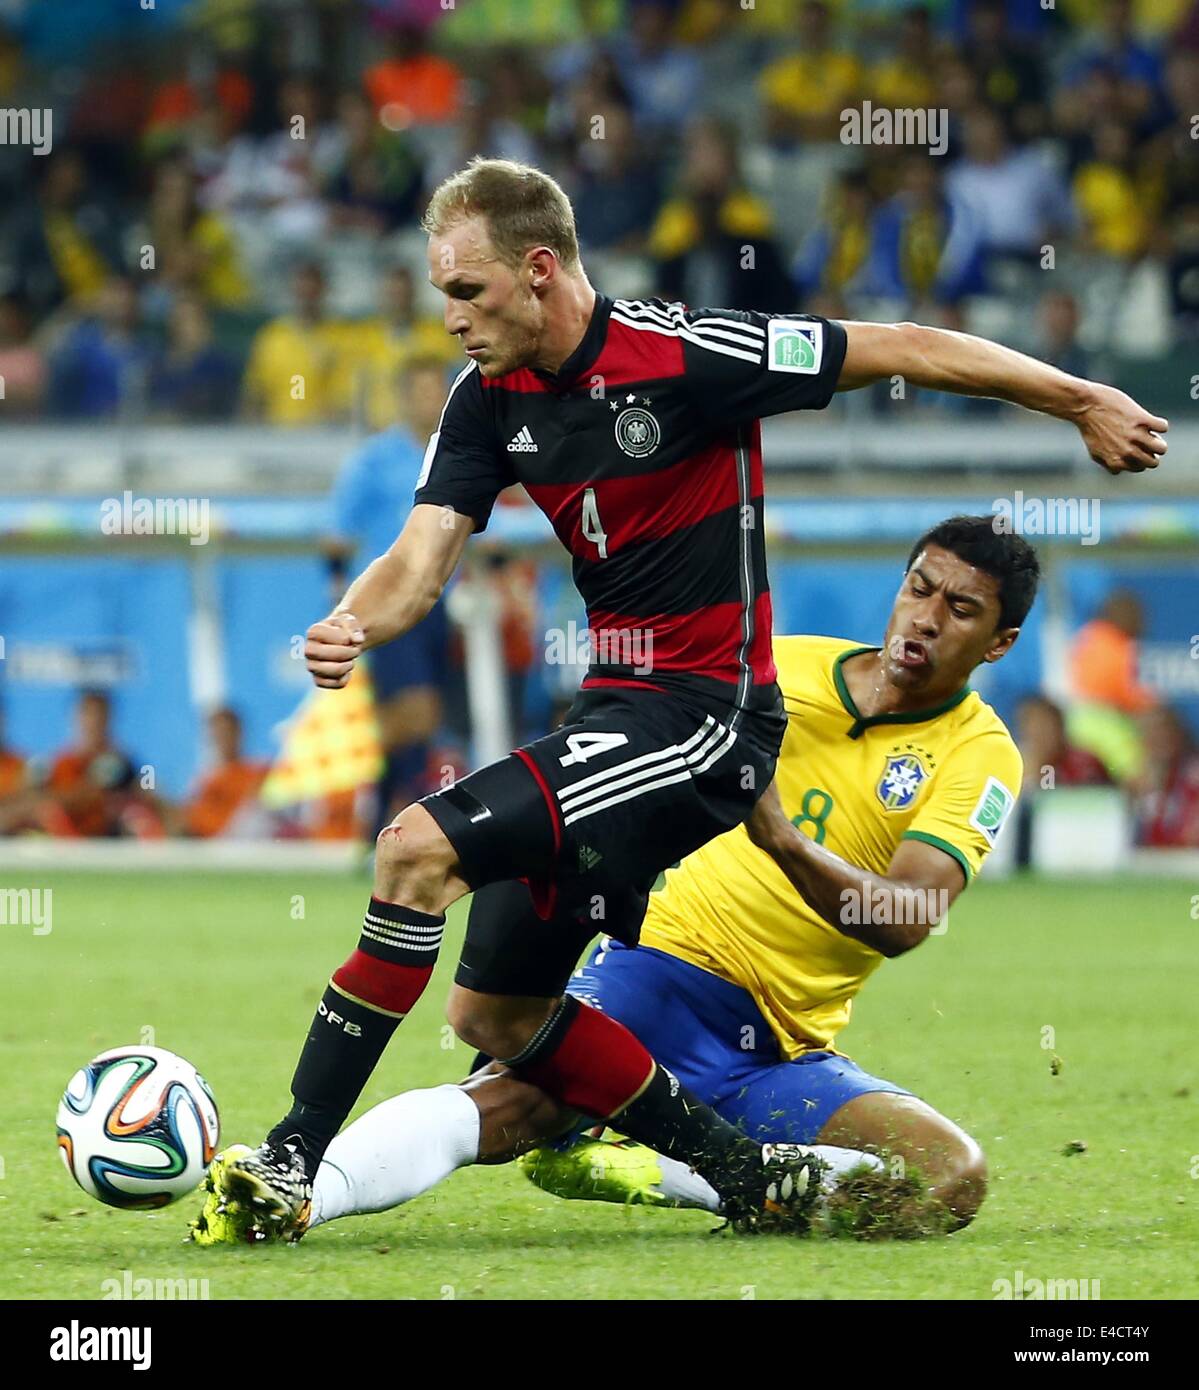 Belo Horizonte, Brazil. 8th July, 2014. Brazil's Paulinho vies with Germany's Benedikt Howedes during a semifinal match between Brazil and Germany of 2014 FIFA World Cup at the Estadio Mineirao Stadium in Belo Horizonte, Brazil, on July 8, 2014. Credit:  Chen Jianli/Xinhua/Alamy Live News Stock Photo